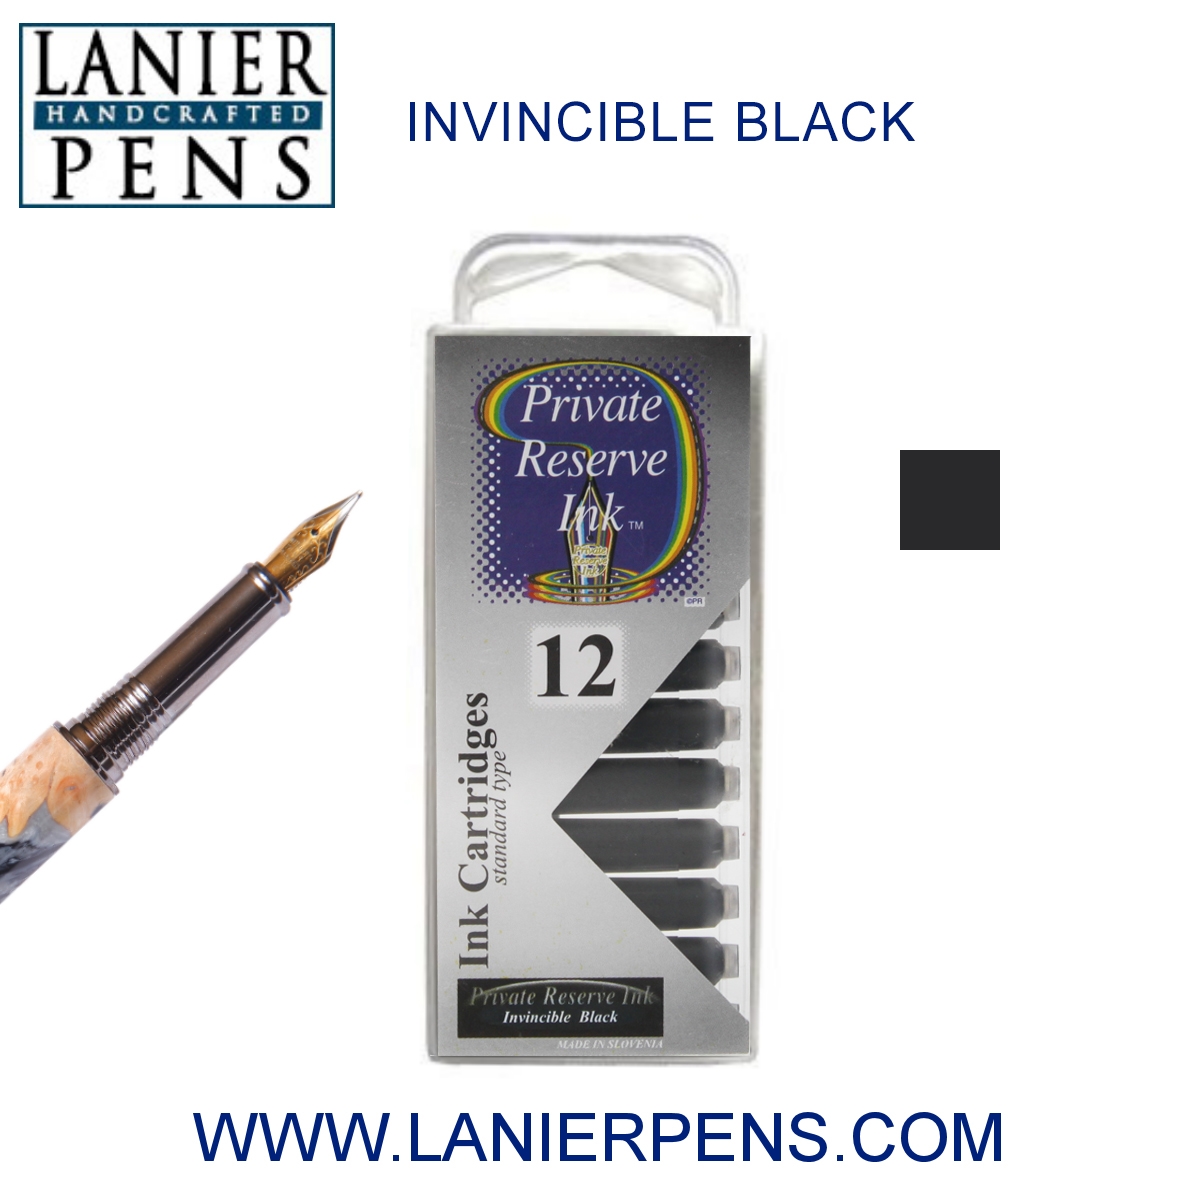 12 Pack - Private Reserve Ink, Universal Fountain Pen Ink Cartridges Clear Case, Invincible Black by Lanier Pens